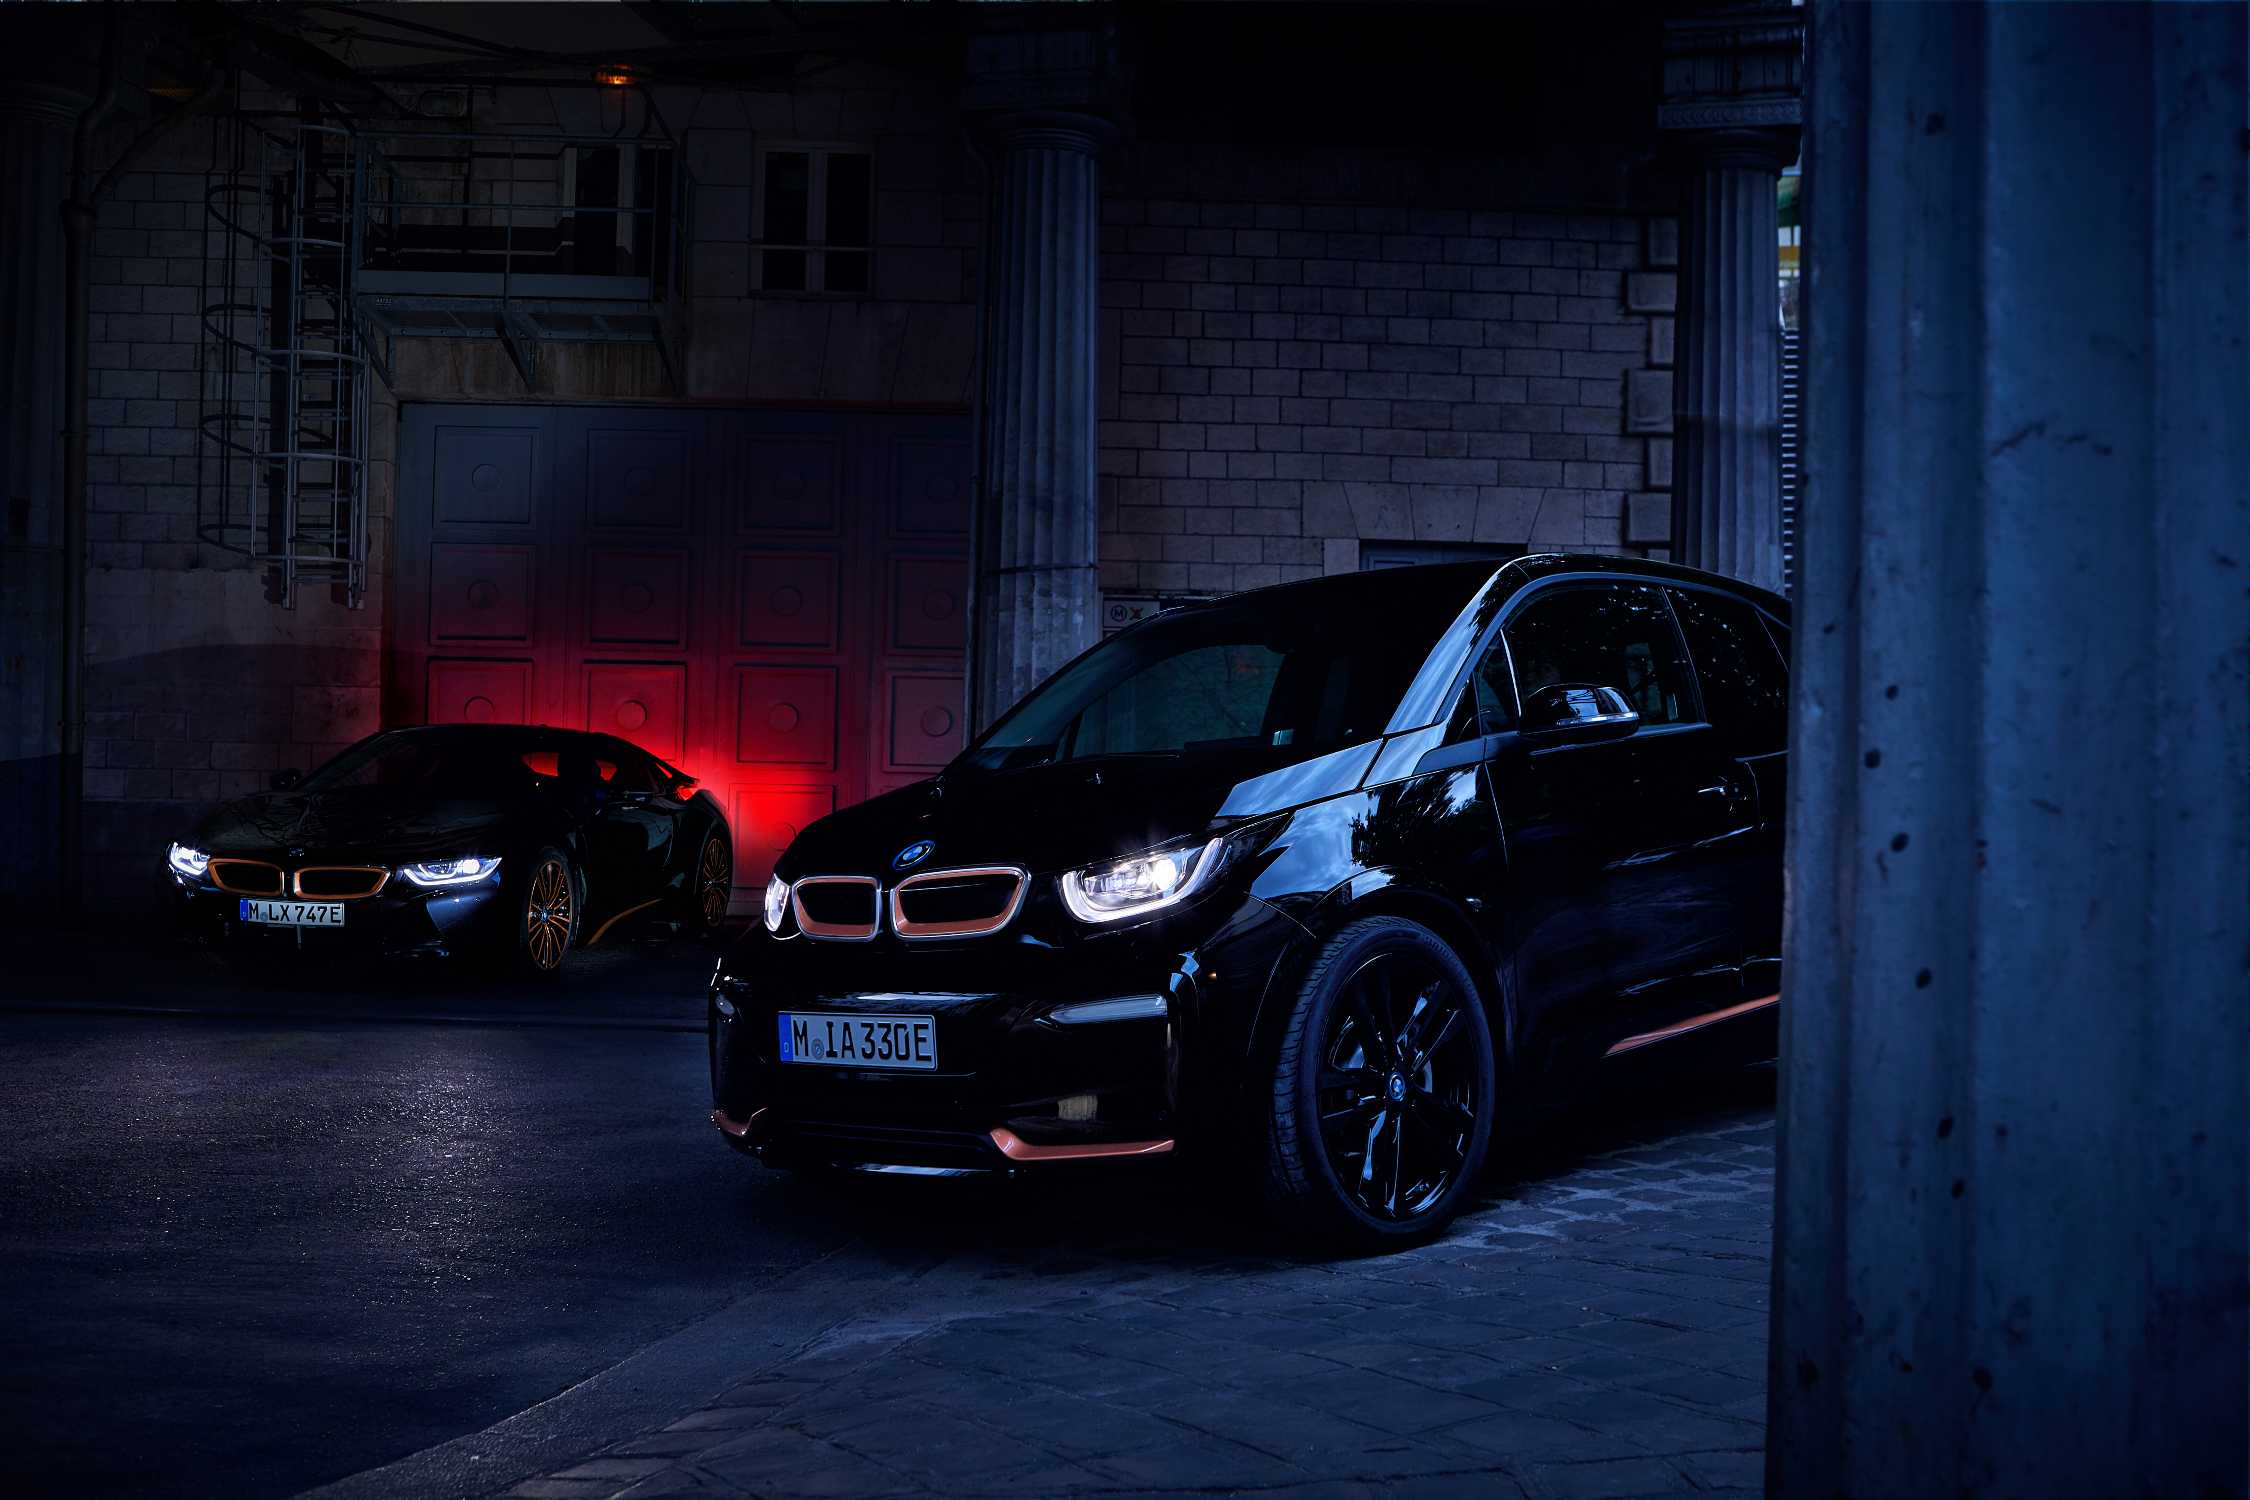 The BMW i3s Edition RoadStyle and the BMW i8 Coupe in the Ultimate Sophisto Edition (09/2019).